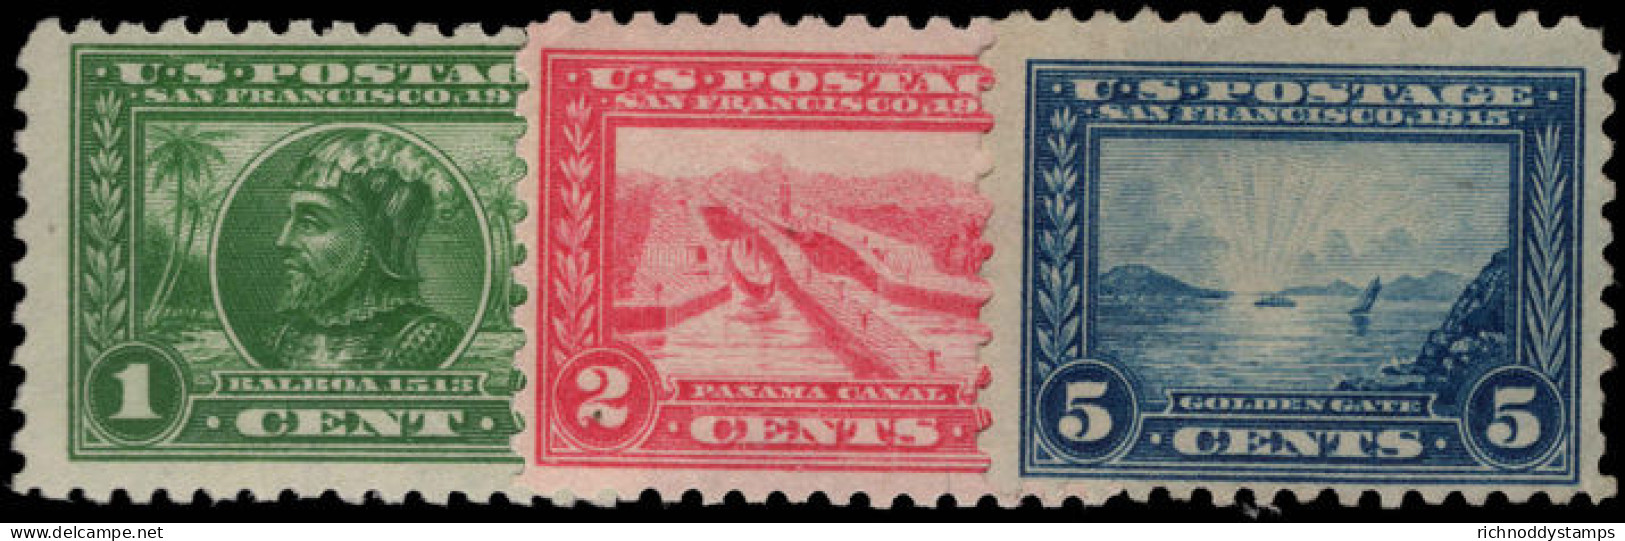 USA 1913 Panama-Pacific Exposition Perf 10 Set To 5c (1c Unmounted 2c Mounted 5c No Gum). - Unused Stamps